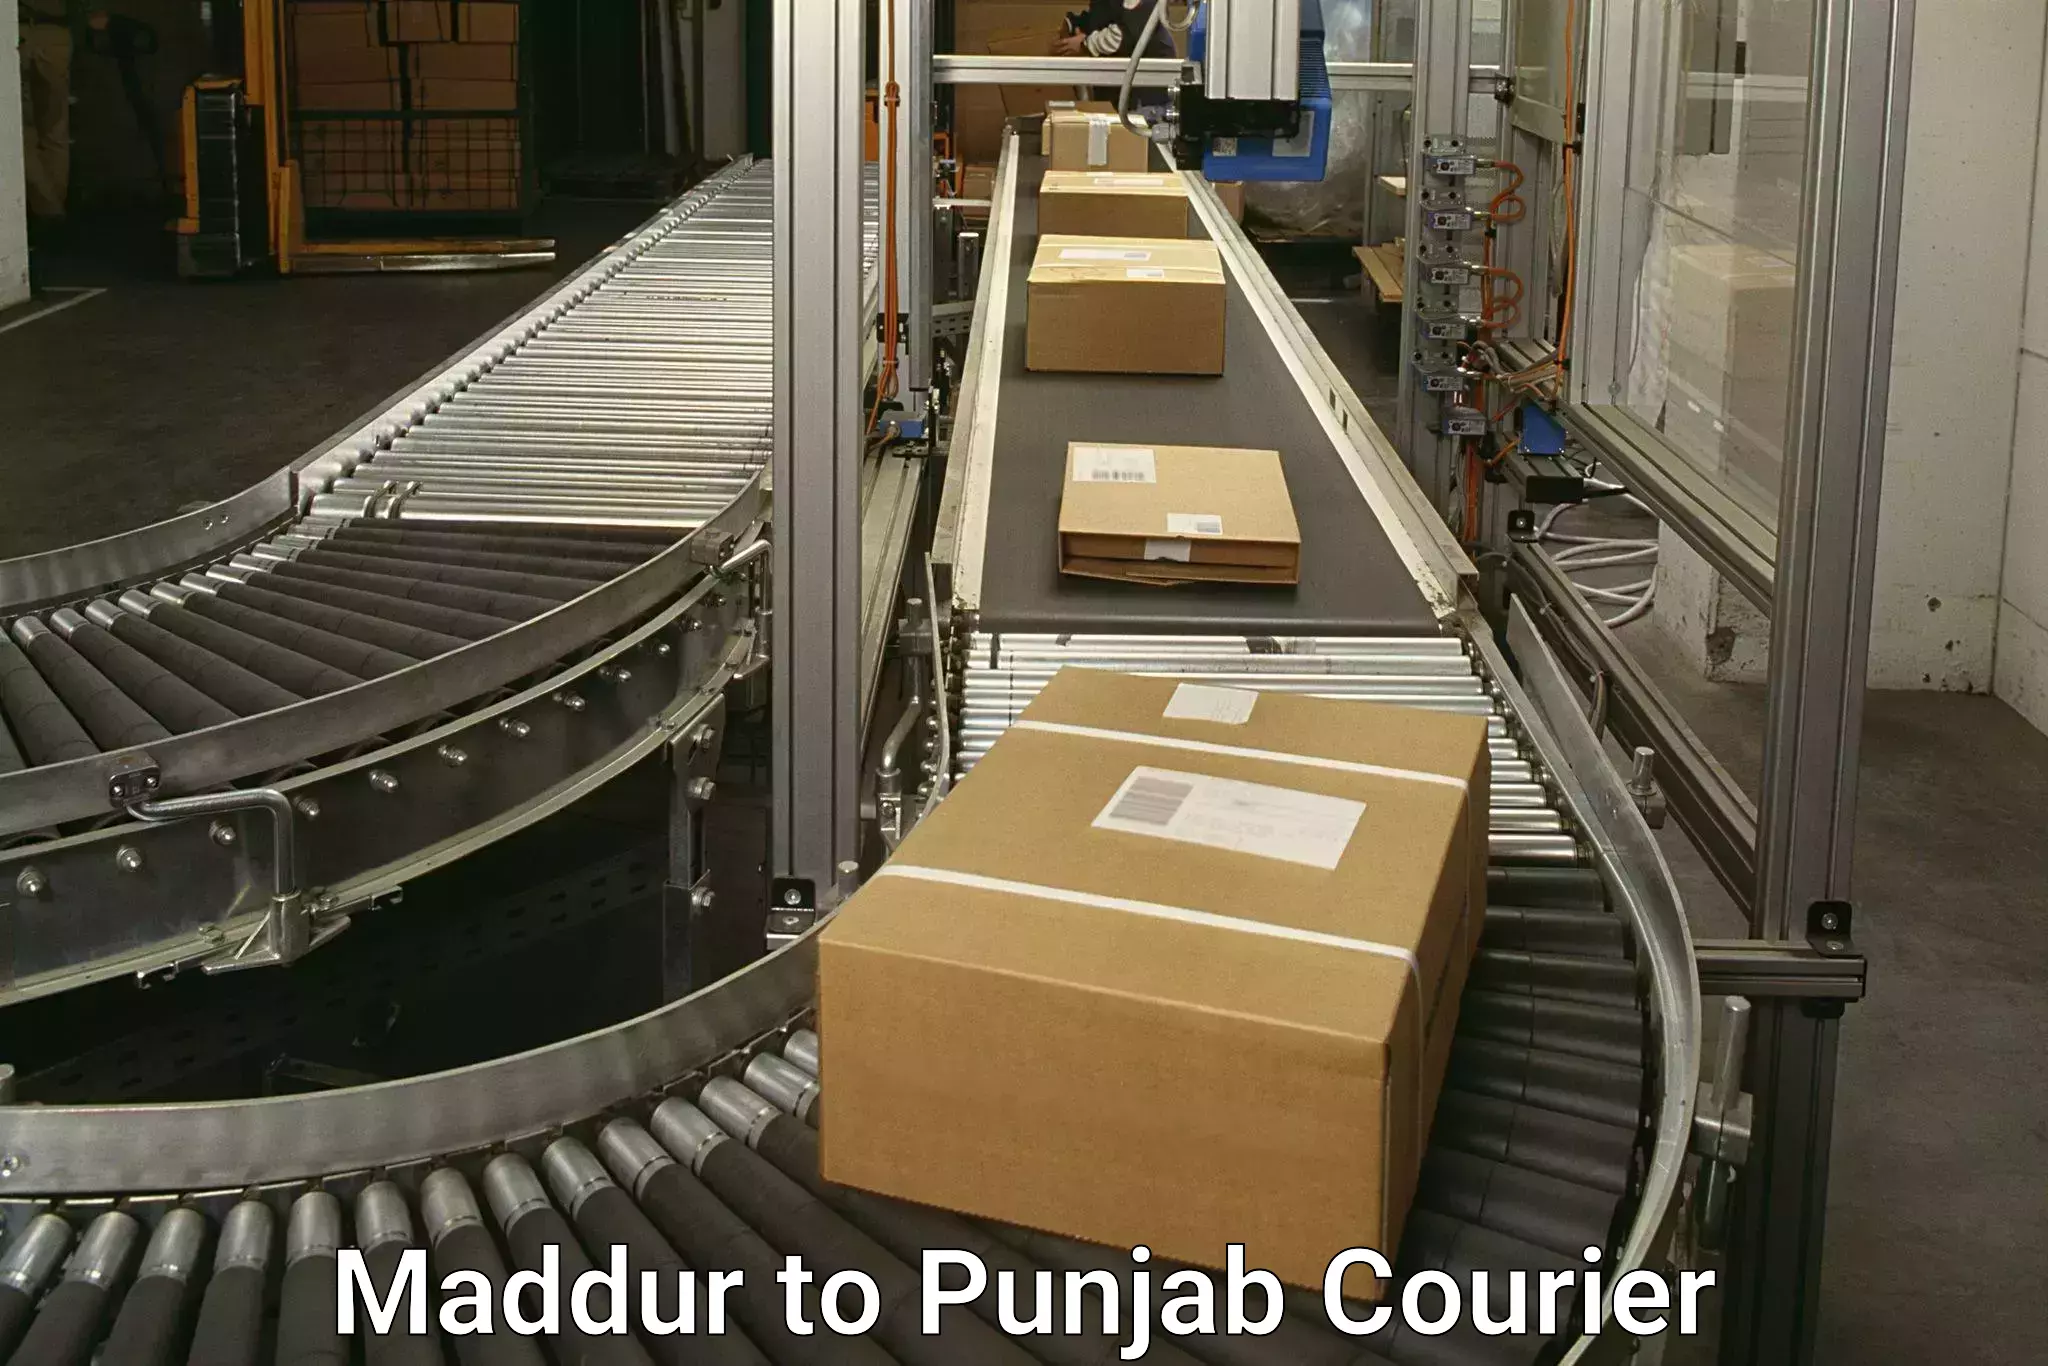 Sustainable courier practices in Maddur to Punjab